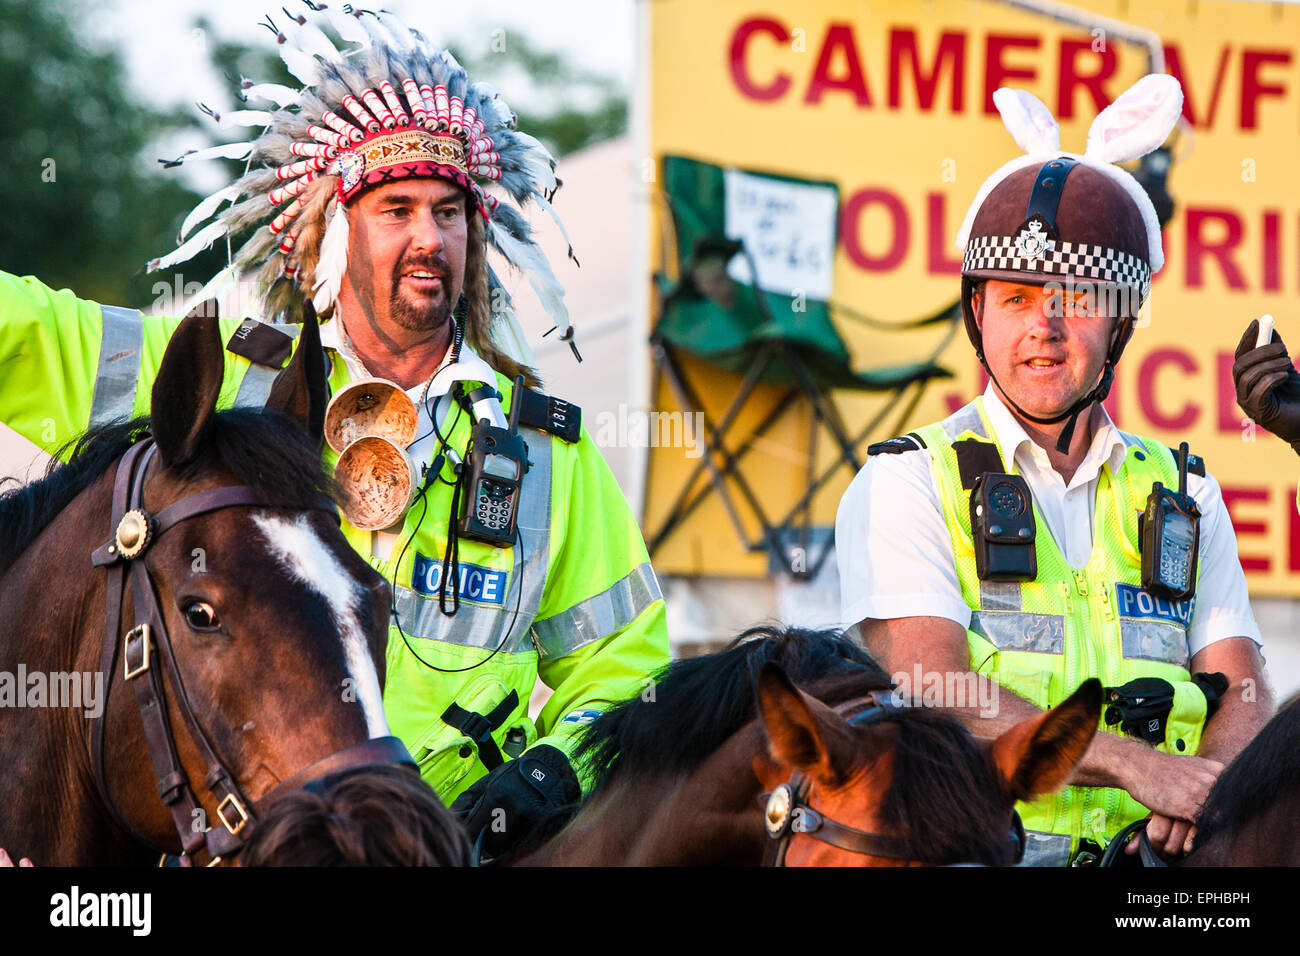 Horse mounted police get into the family party atmosphere by dressing up at Glastonbury Festival/ 'Glasto' held on working farm, Worthy Farm, near village of Pilton. Glastonbury Festival. Somerset, England. June. Stock Photo